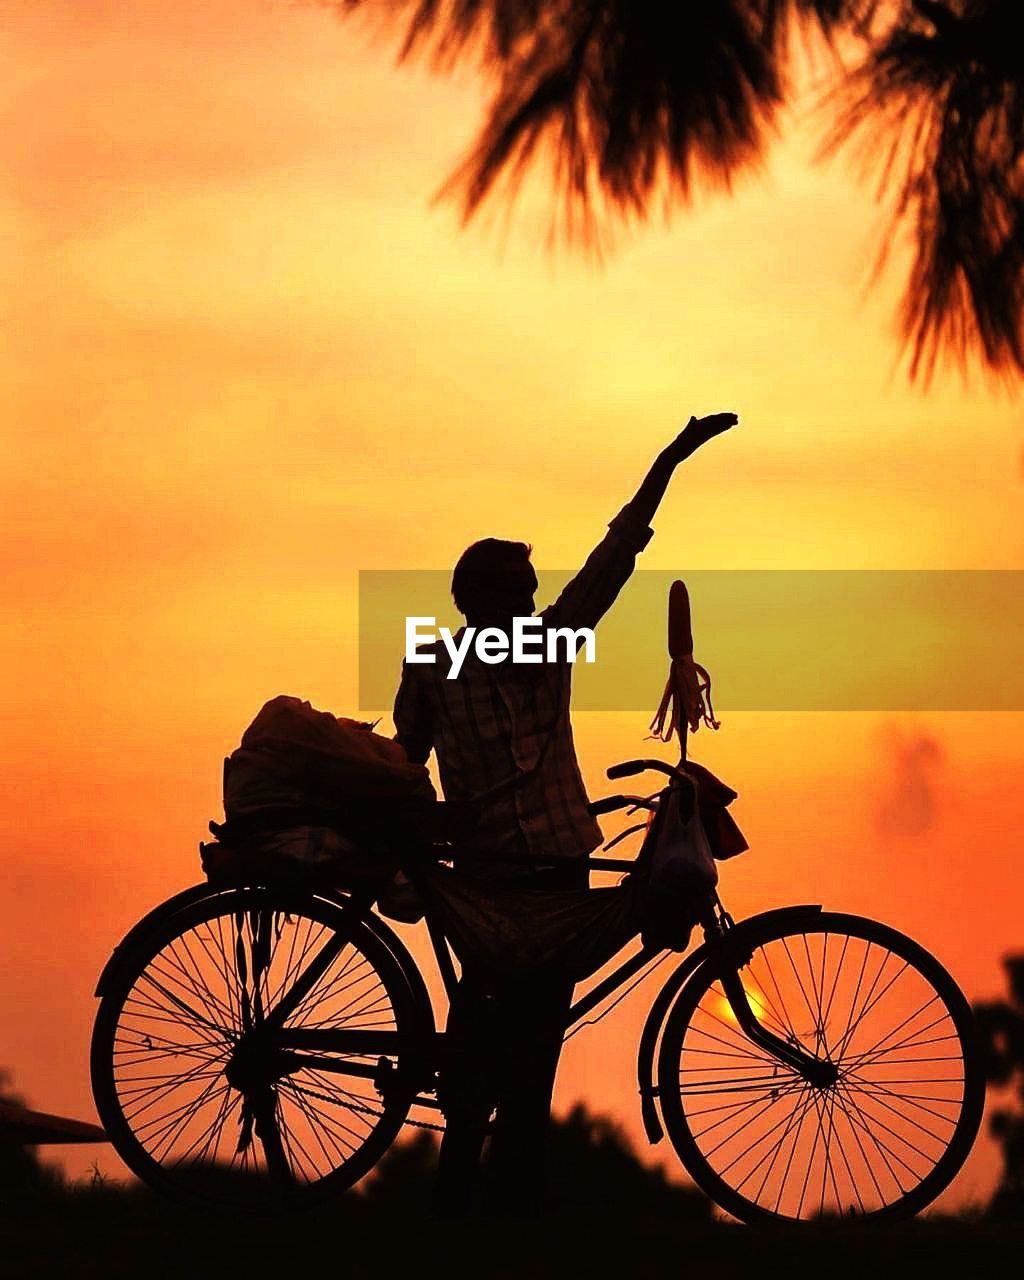 Low angle view of silhouette bicycle against orange sky